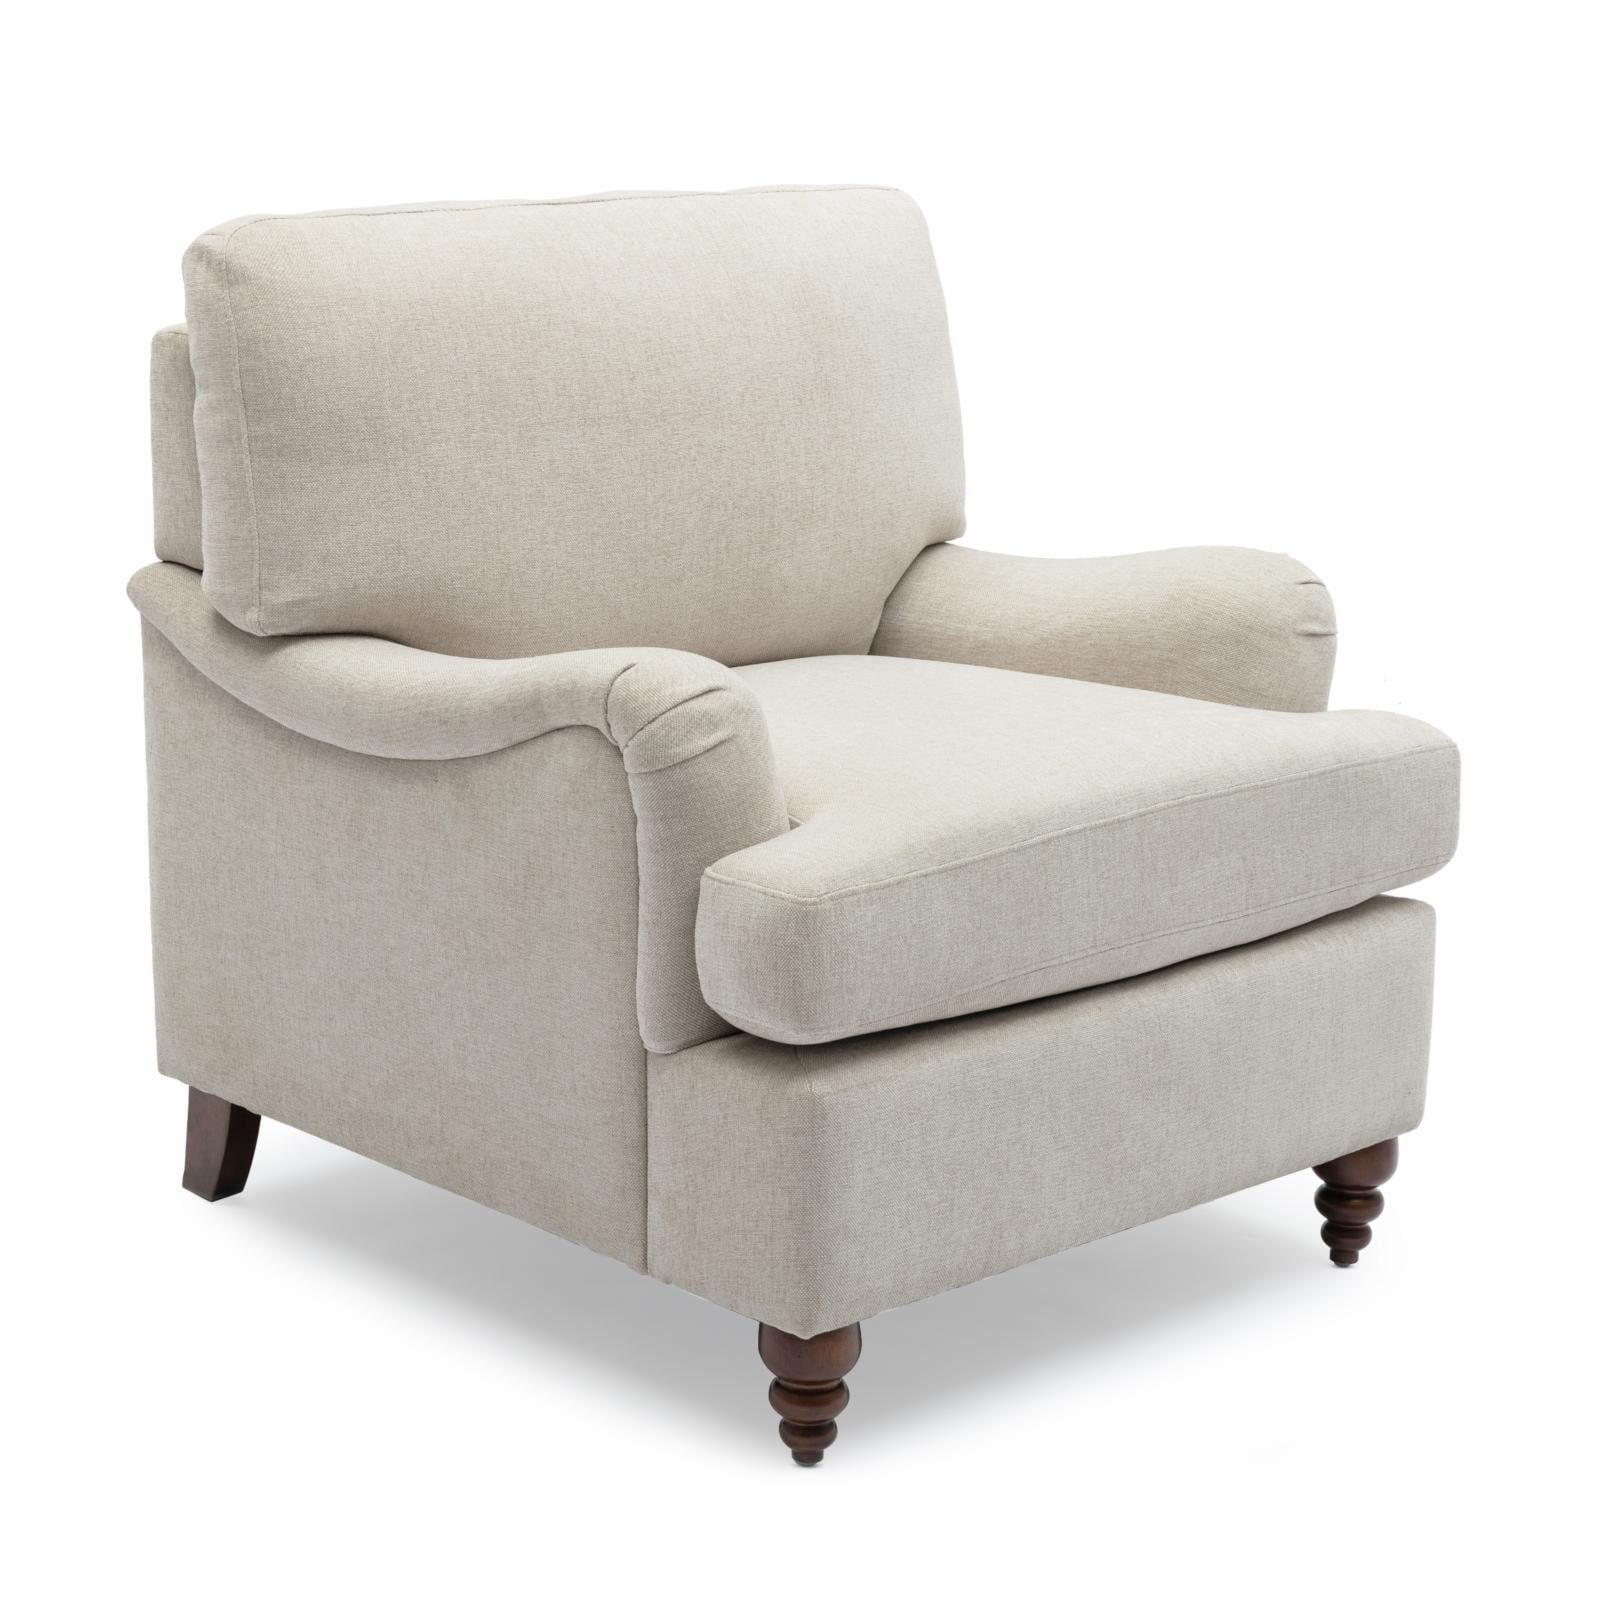 Clarendon Sea Oat Beige Polyester Fabric Upholstered Transitional Arm Chair | Walmart (US)